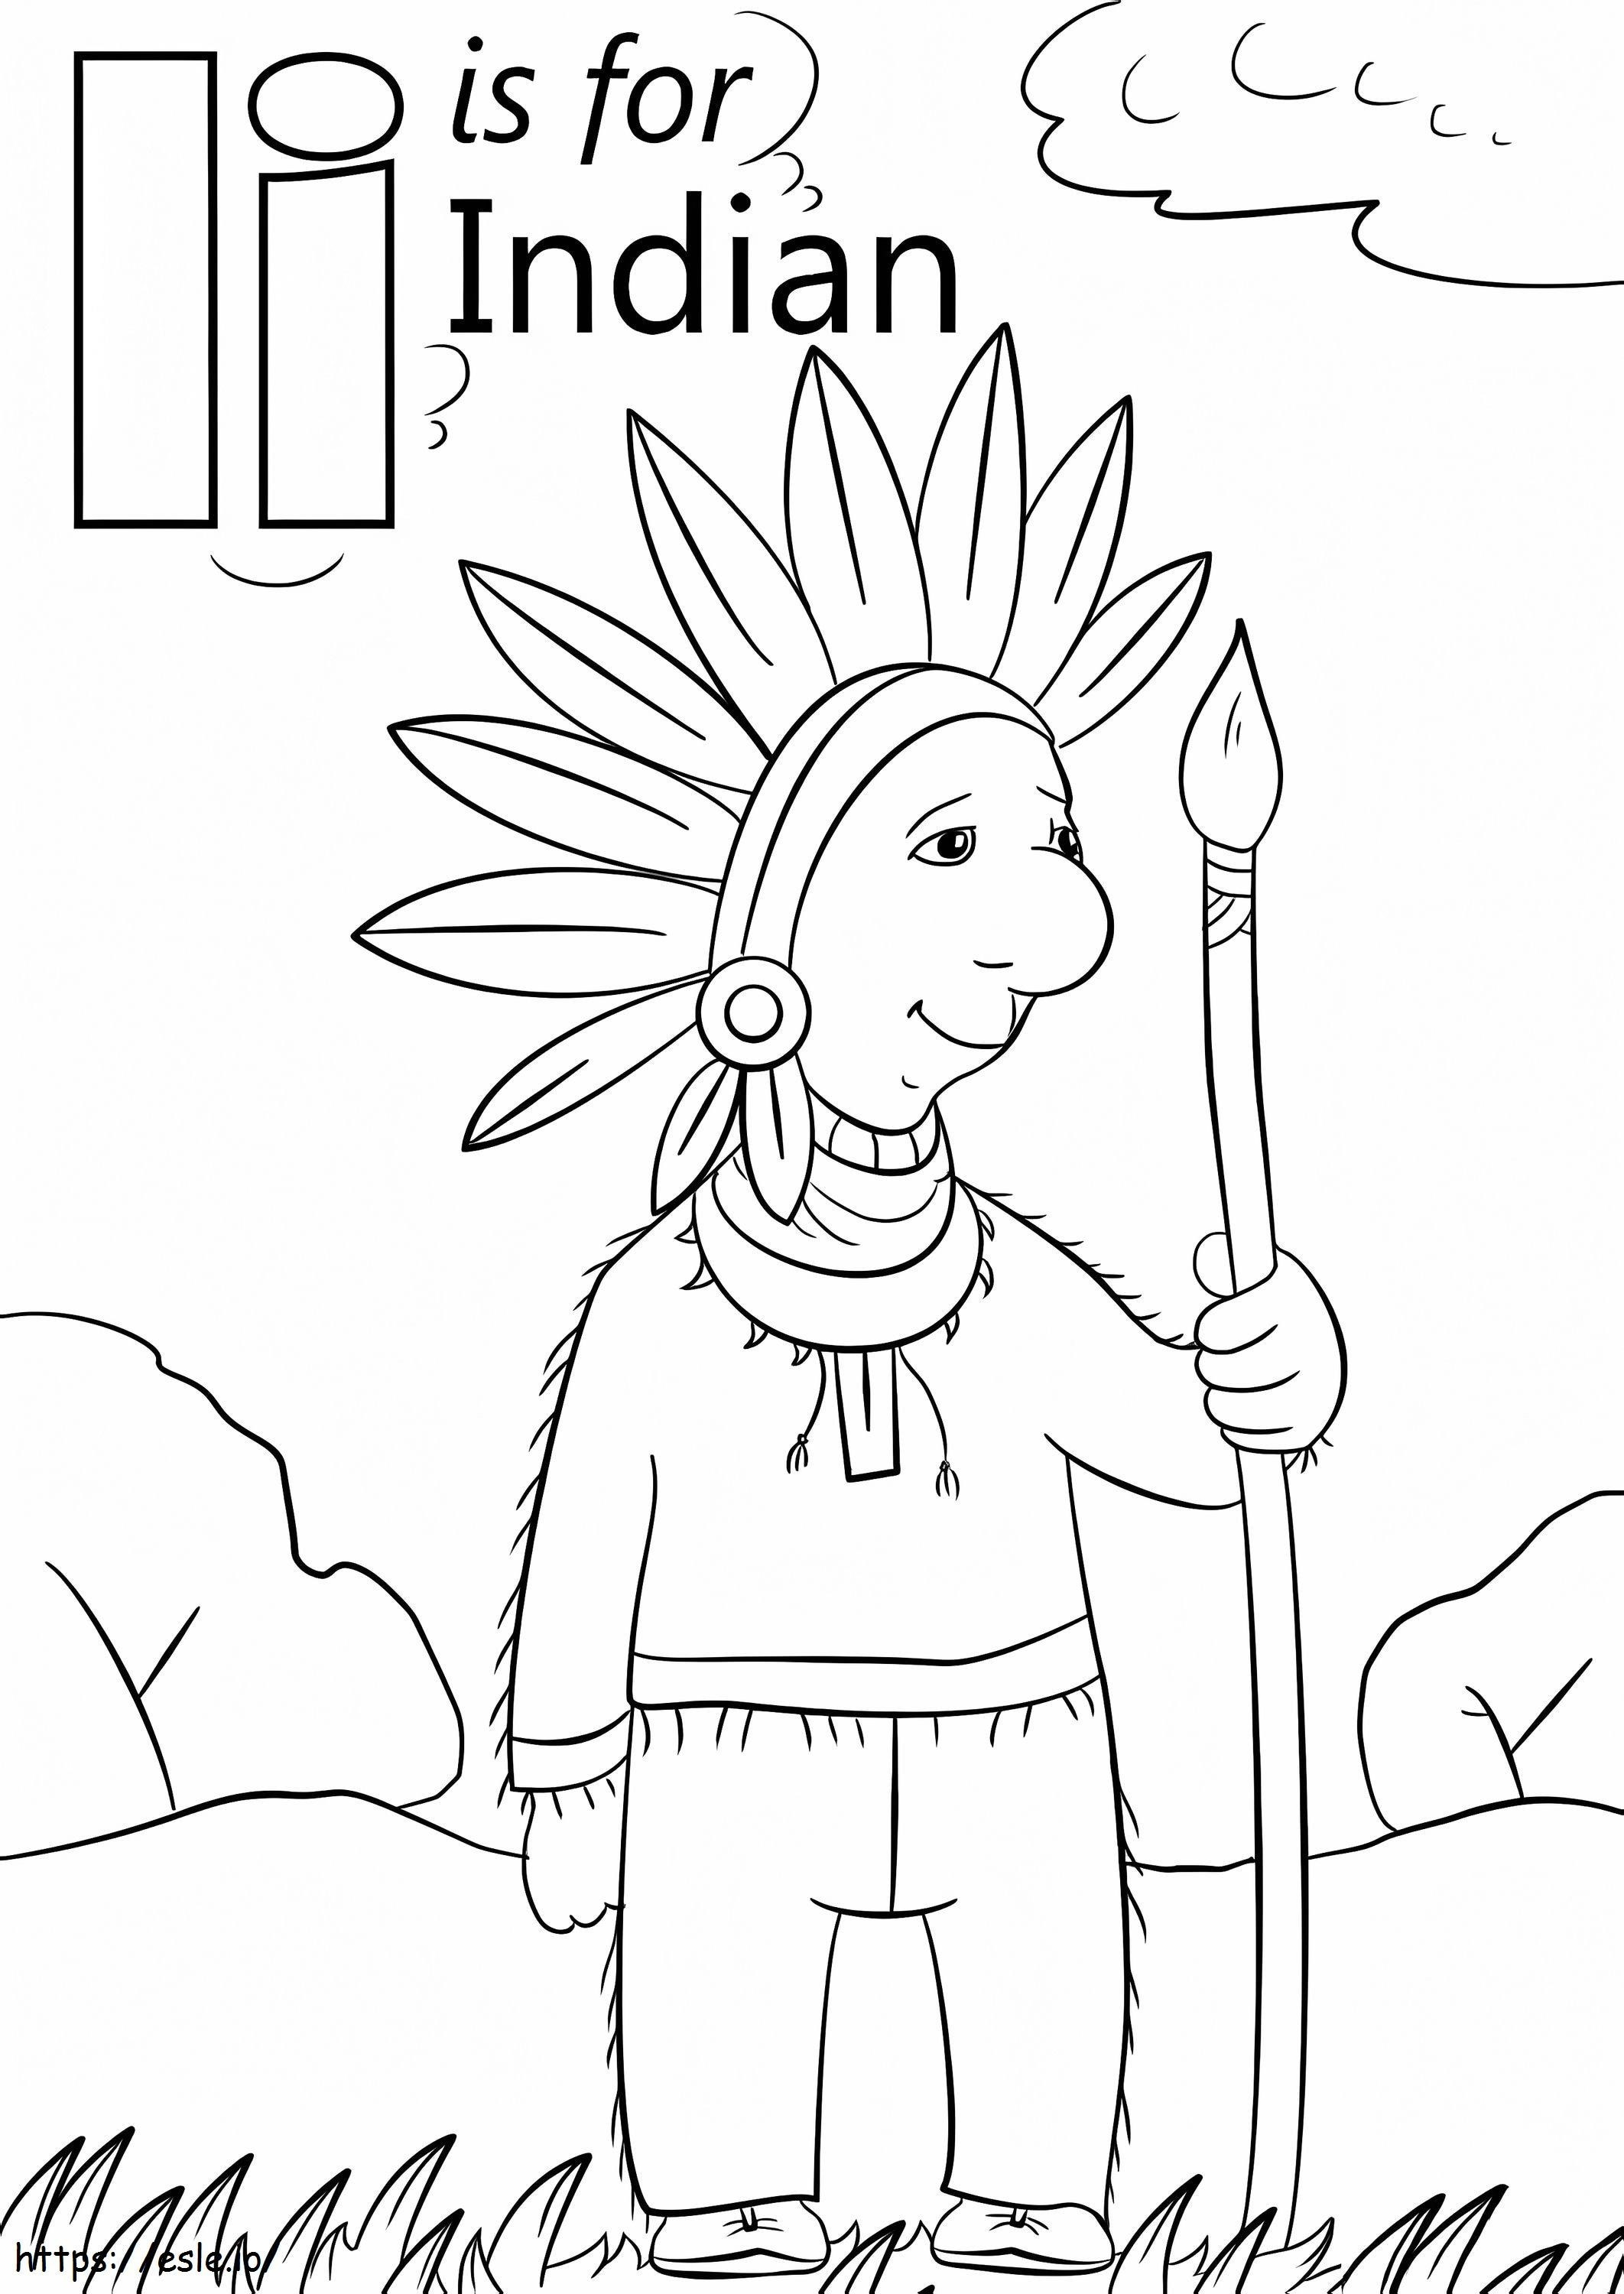 Indian Letter I coloring page